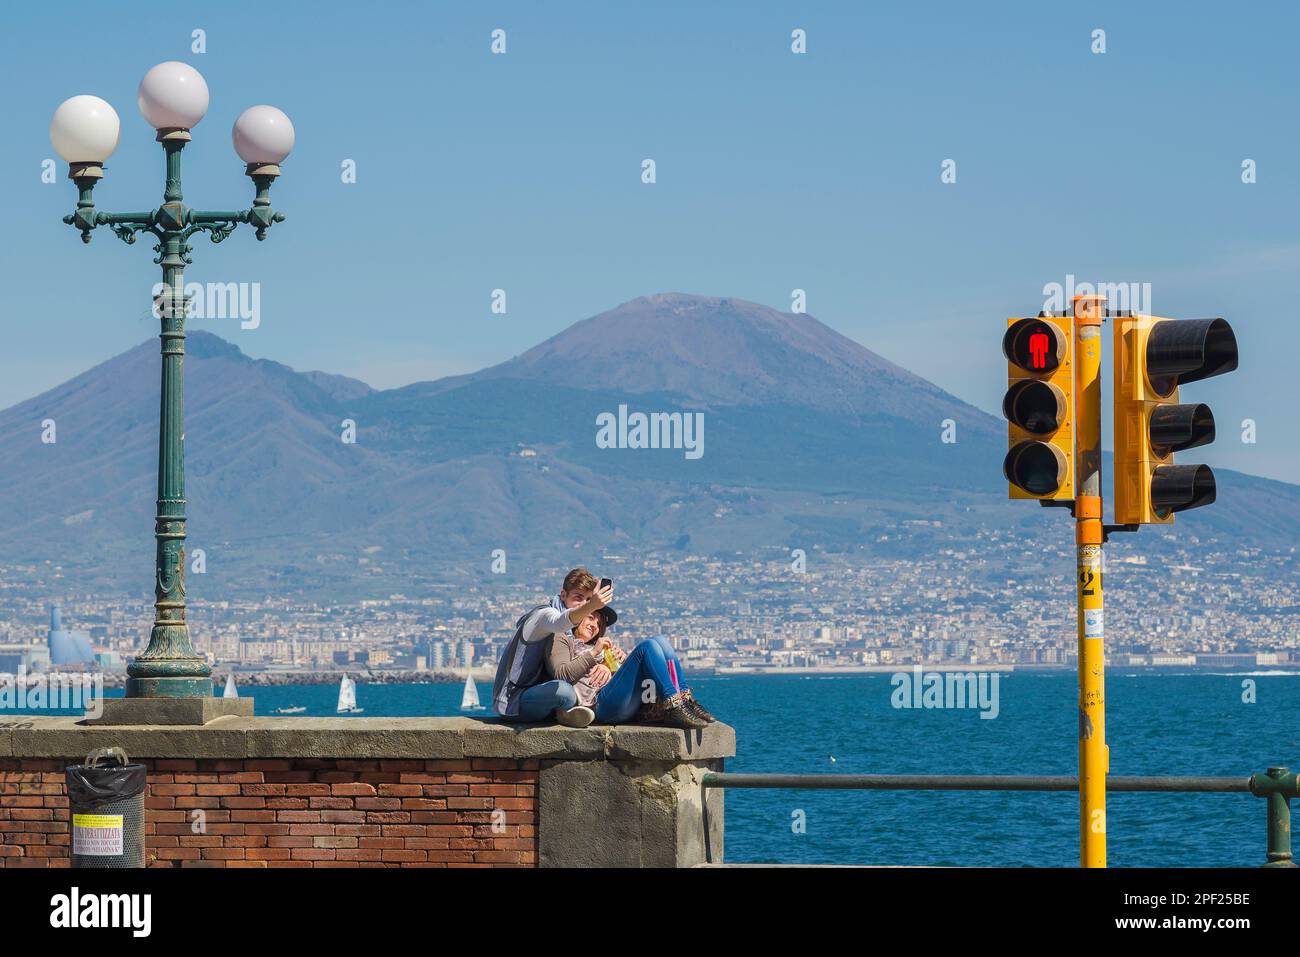 Teenagers happy couple, view in summer of a young couple taking a selfie photo of themselves against the Bay of Naples and Mount Vesuvius, Italy Stock Photo